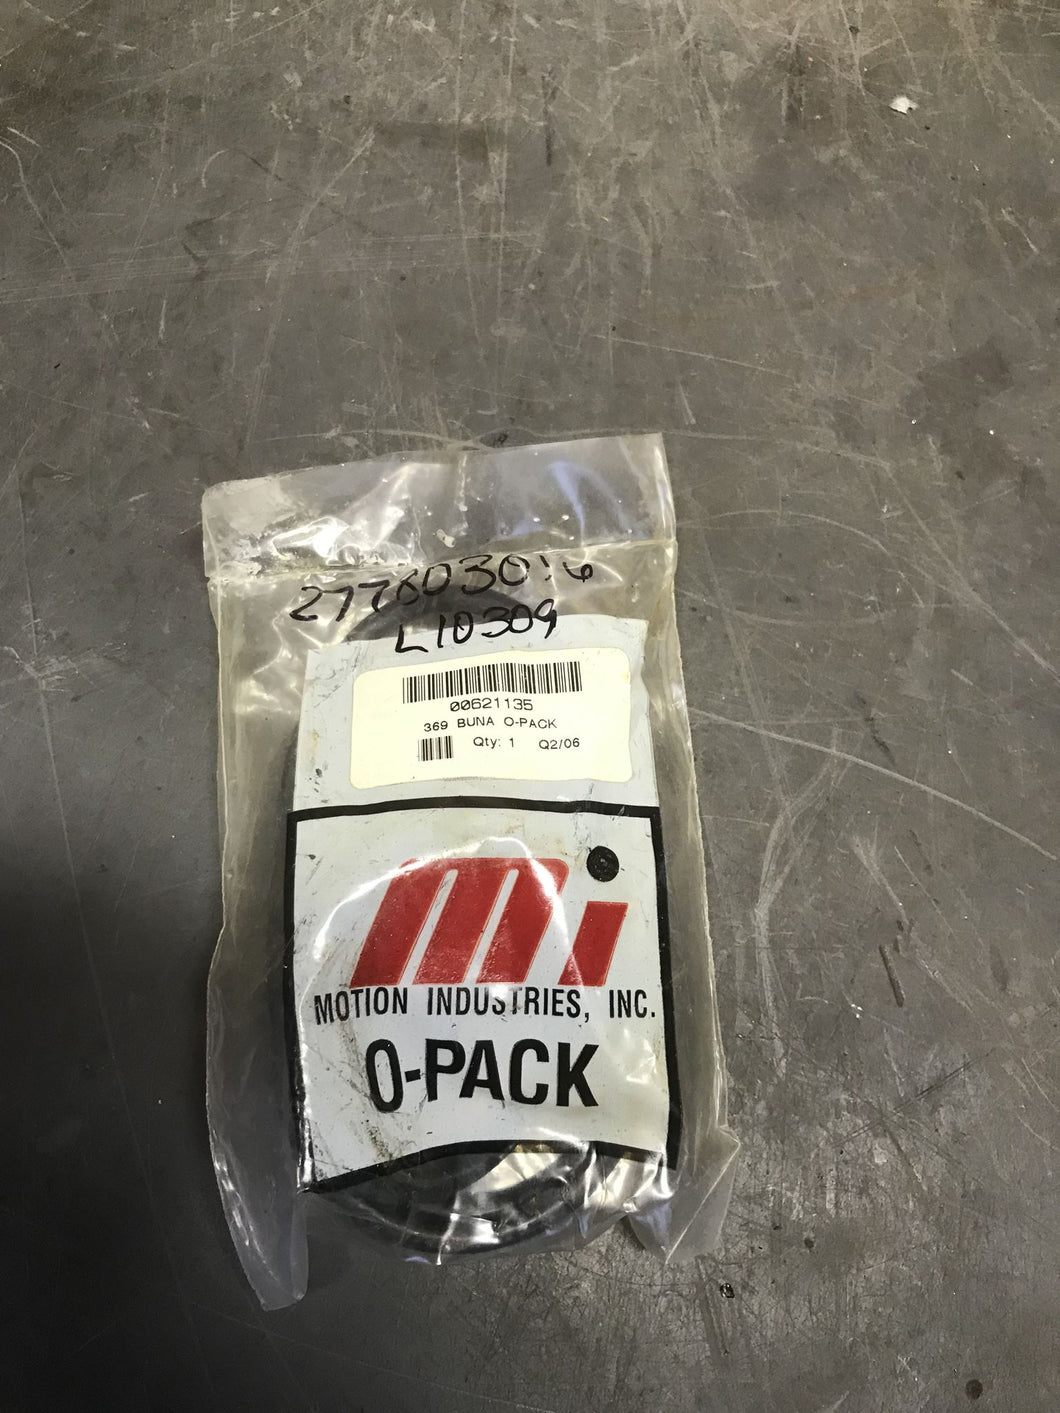 Motion Industries 00621135 369 Buna O-Pack